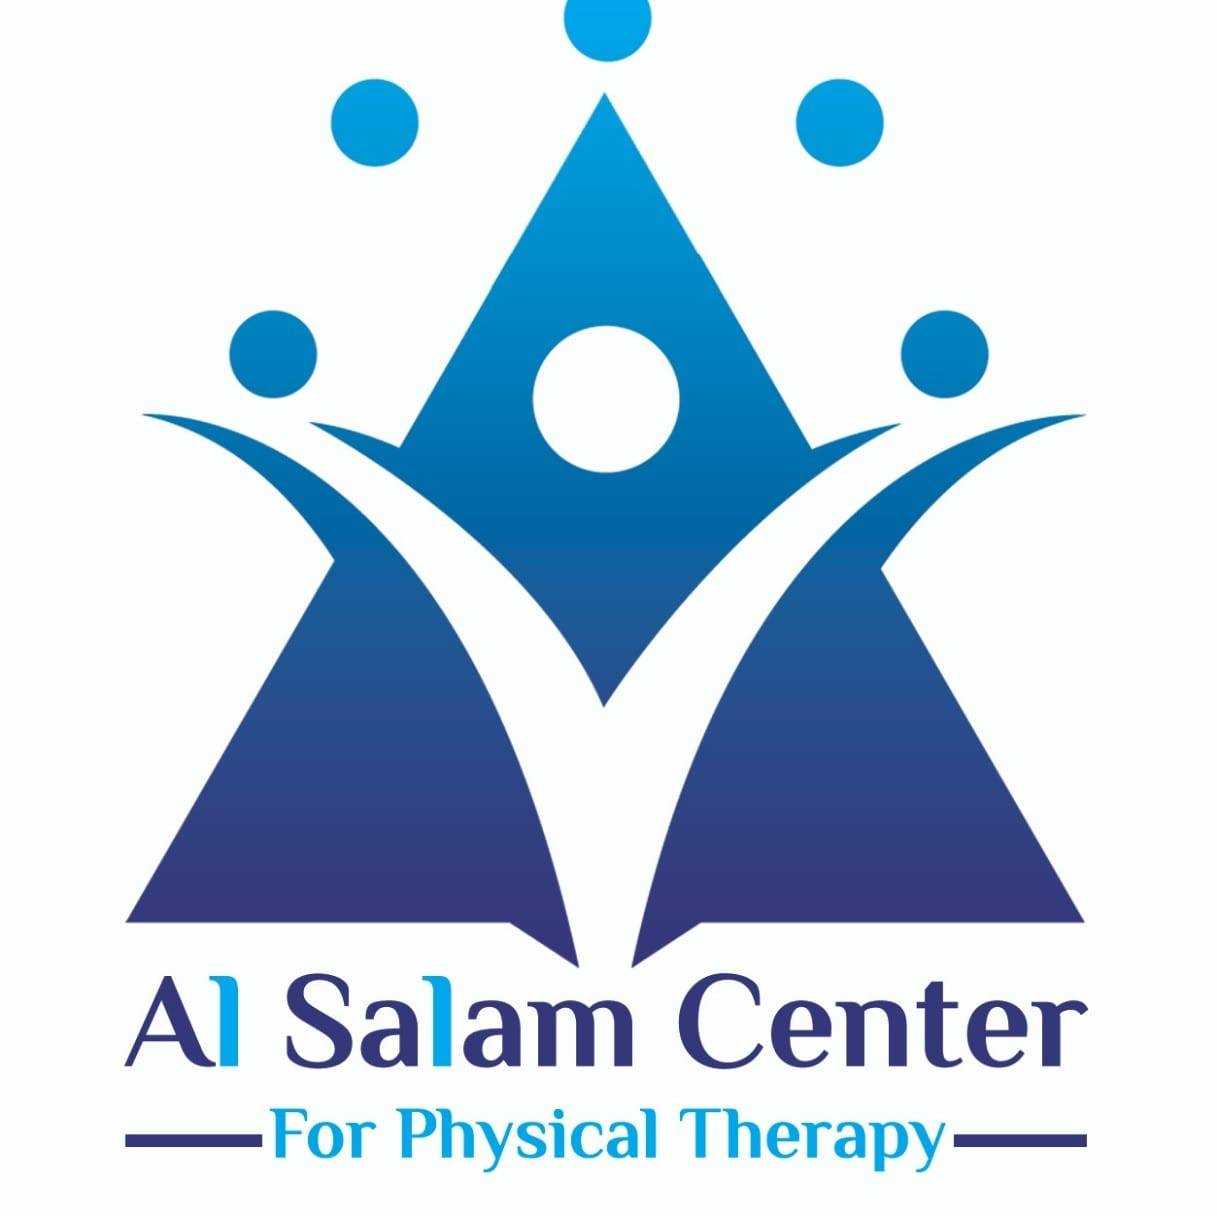 Al Salam Center For Physical Therapy